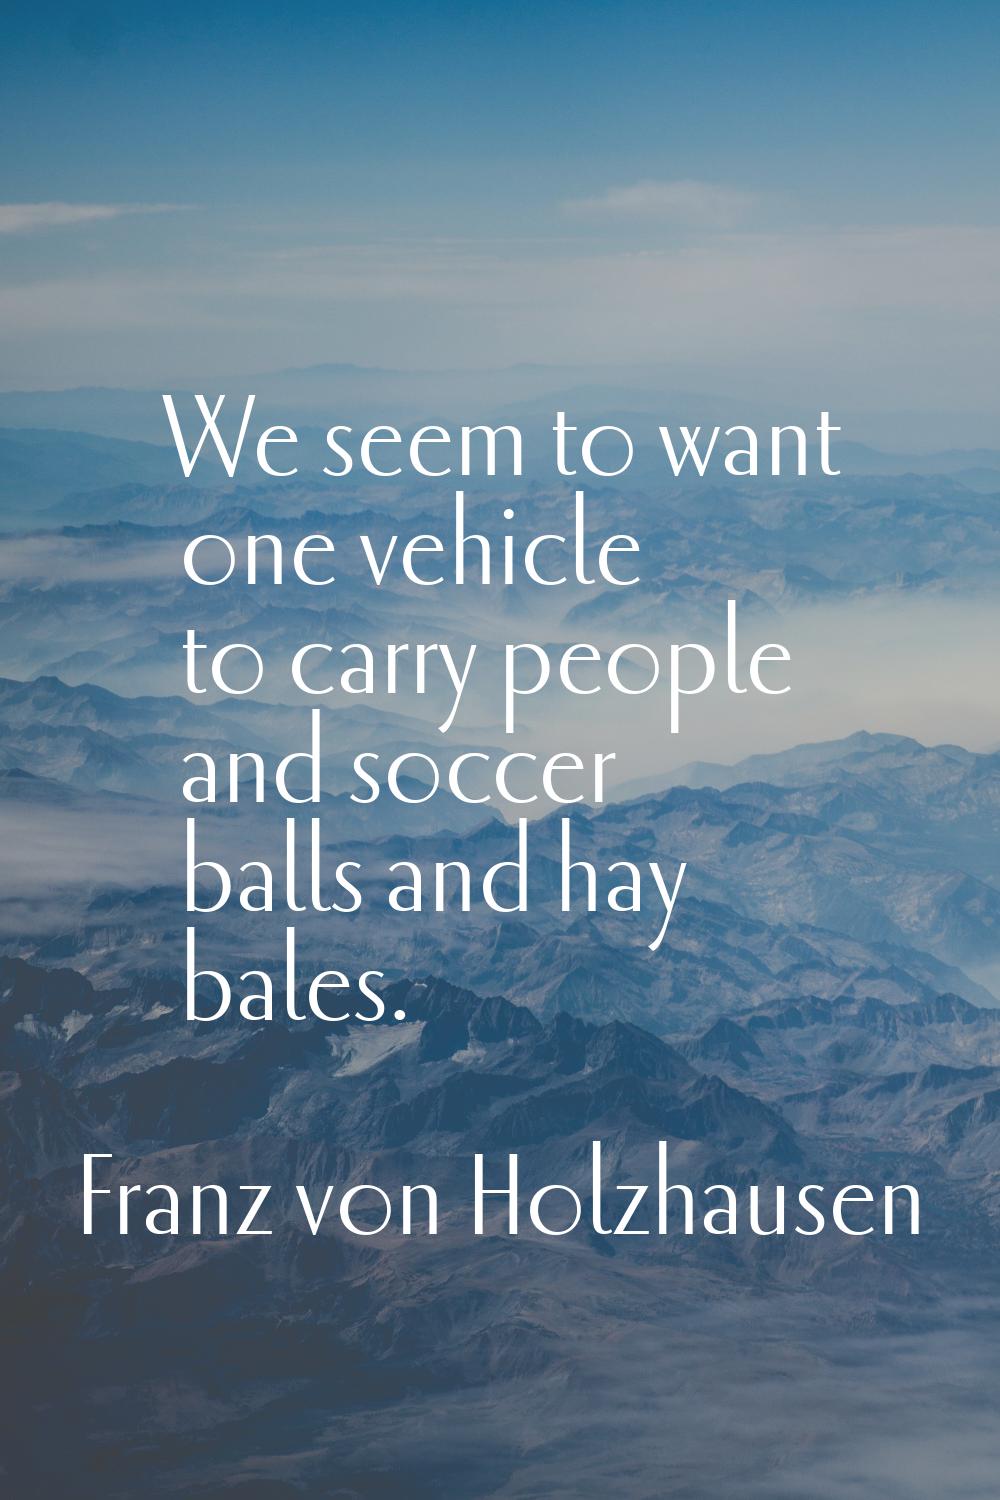 We seem to want one vehicle to carry people and soccer balls and hay bales.